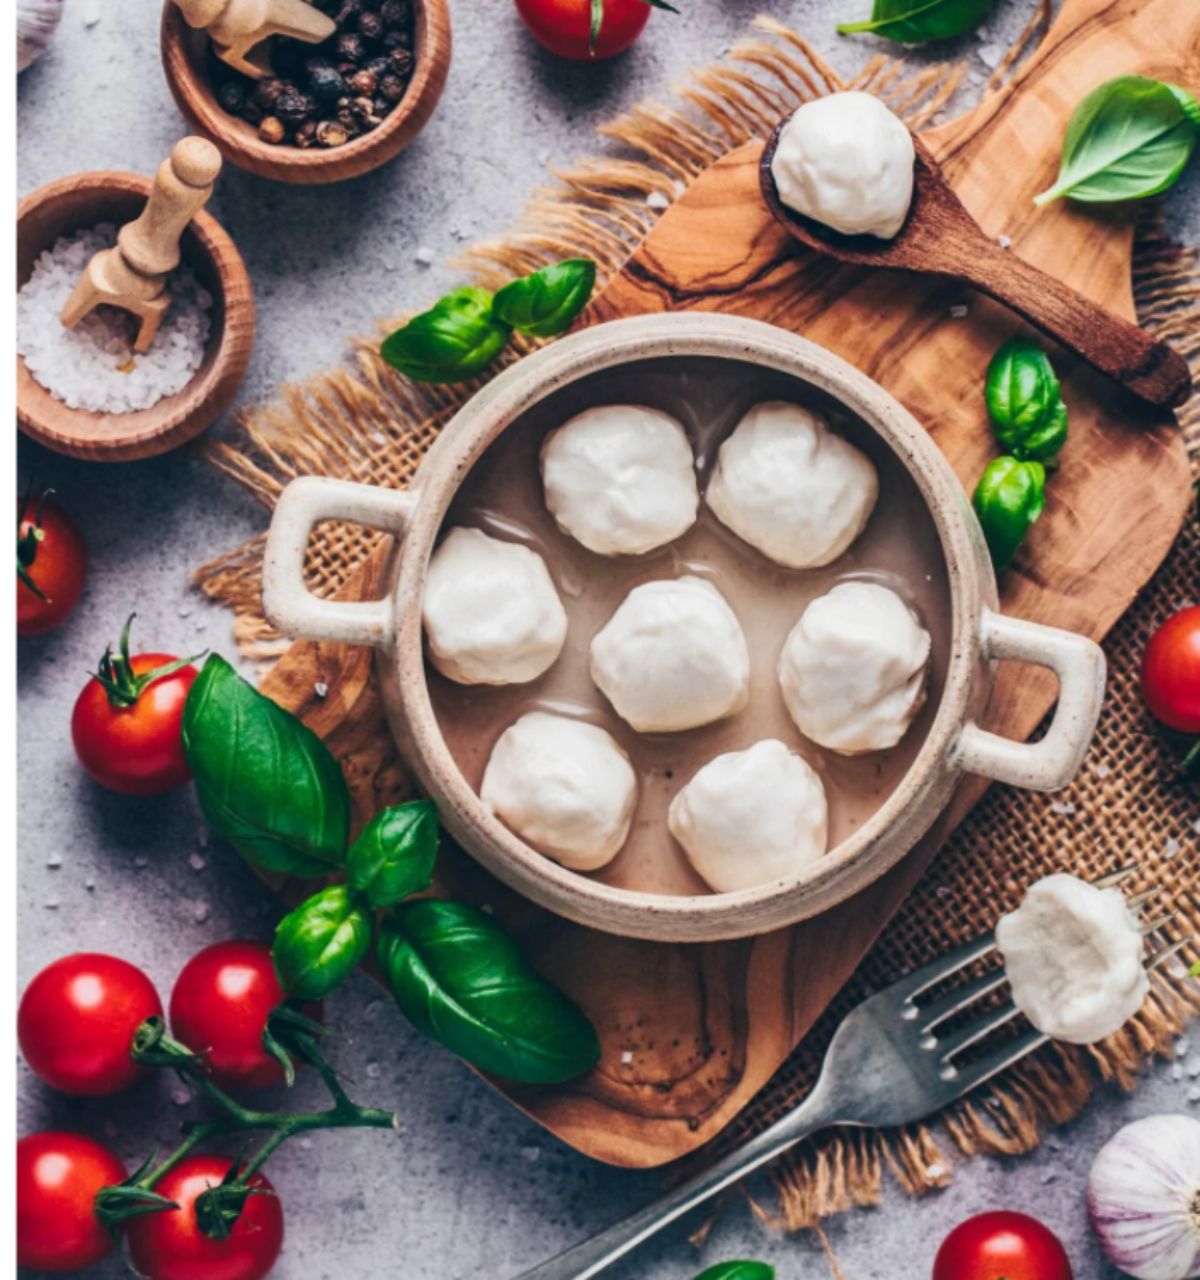 A dish of vegan mozzarella balls surrounded by fresh basil, cherry tomatoes and dishes of salt and pepper